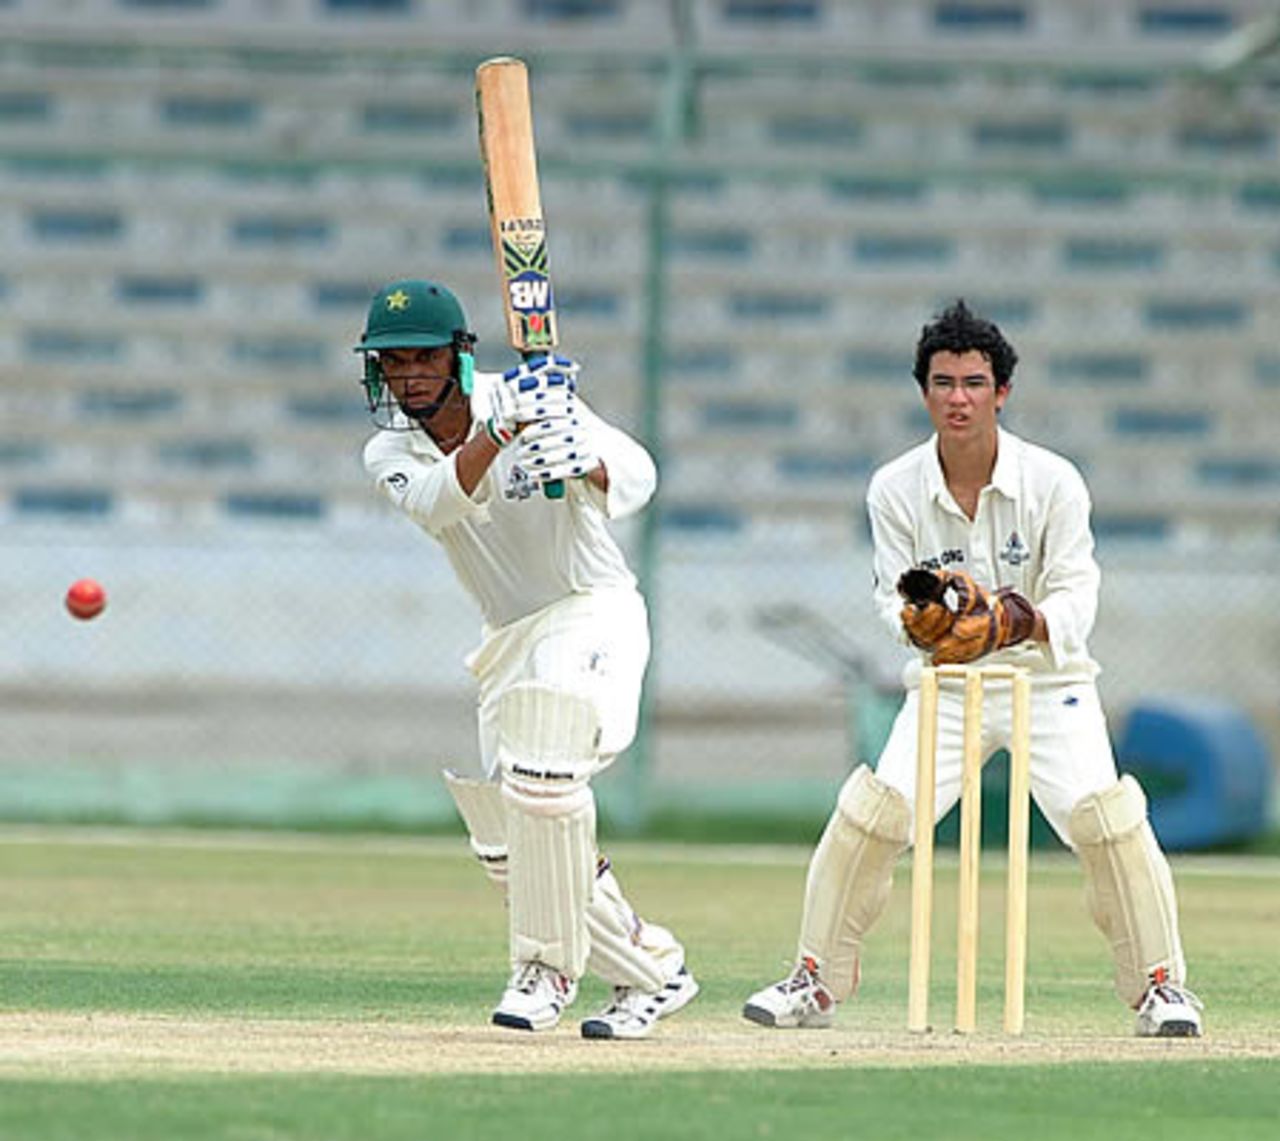 Adnan Ilyas unleashes an ondrive on his way to 168 not out, Hong Kong Under-19s v Oman Under-19s at National Stadium Karachi, Youth Asia Cup 2003, 15 July 2003.